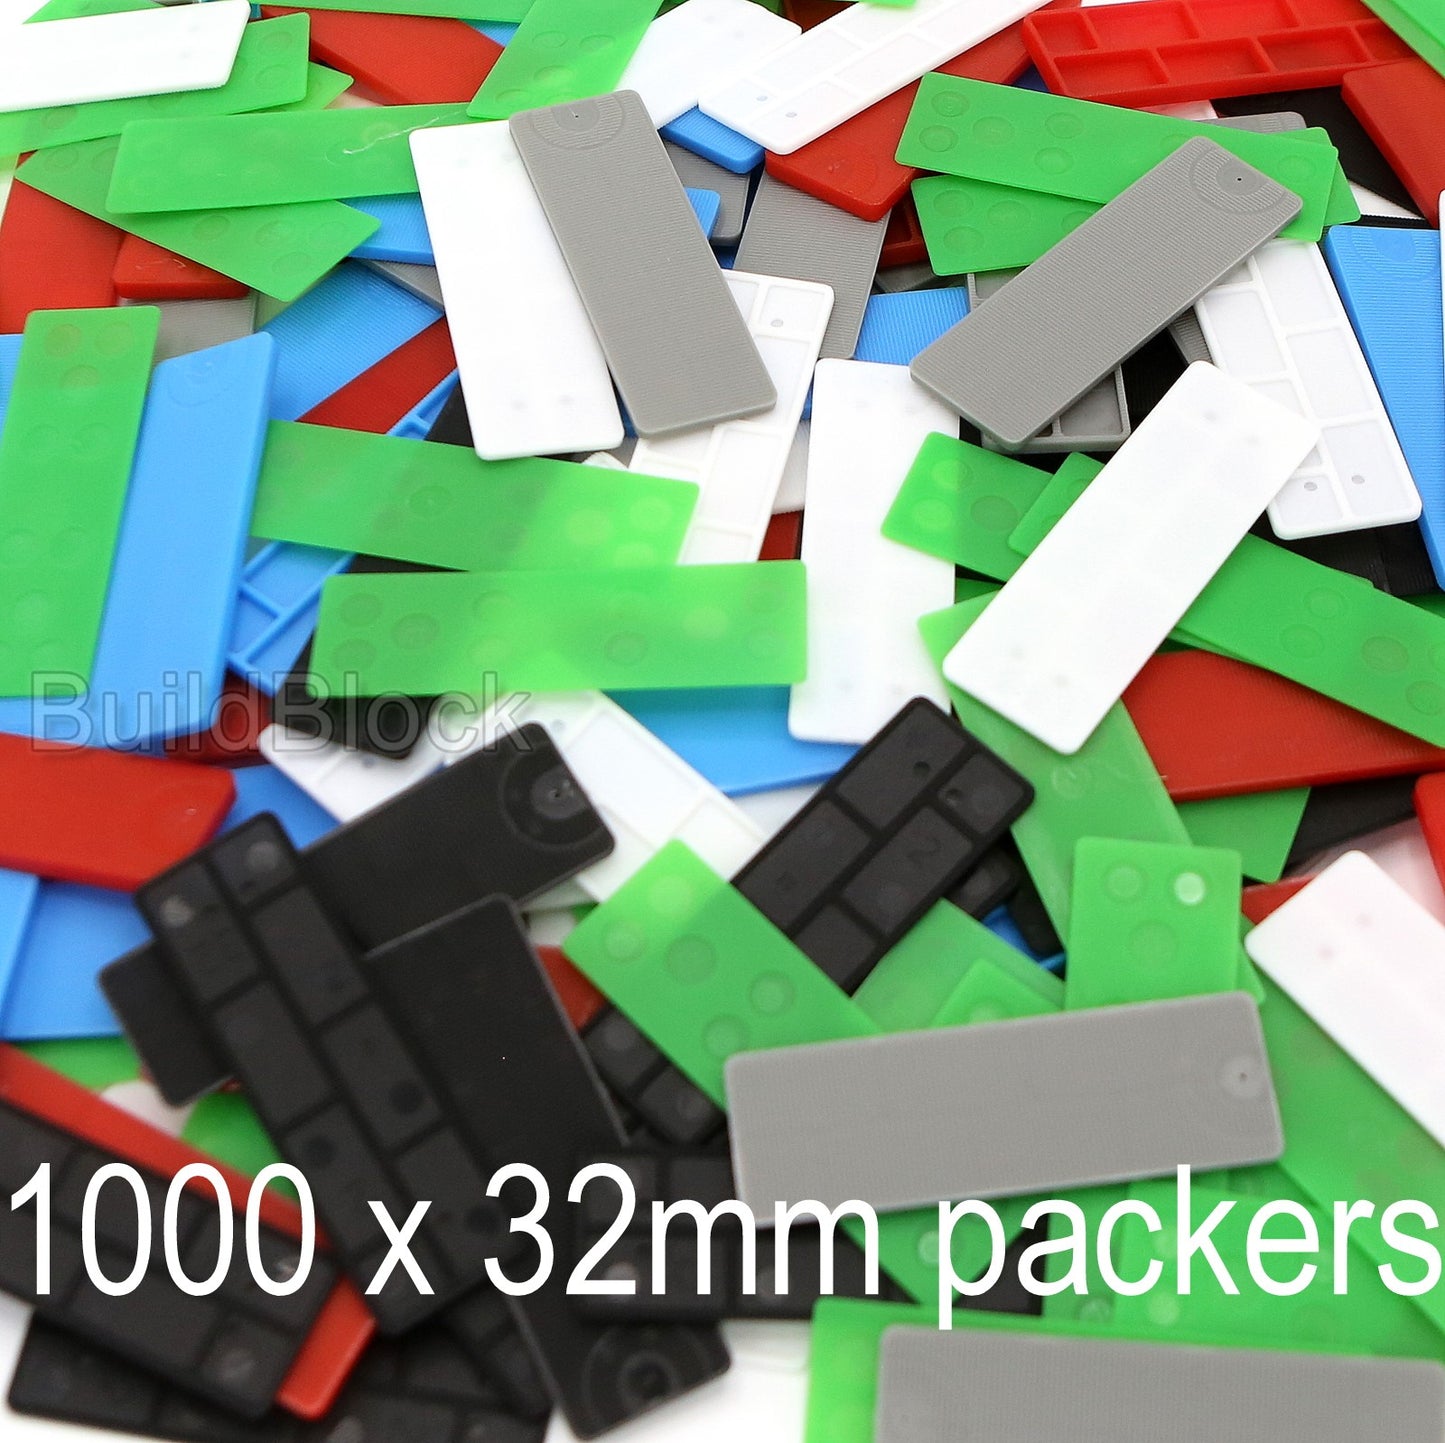 1000 x 32mm Glazing Packers